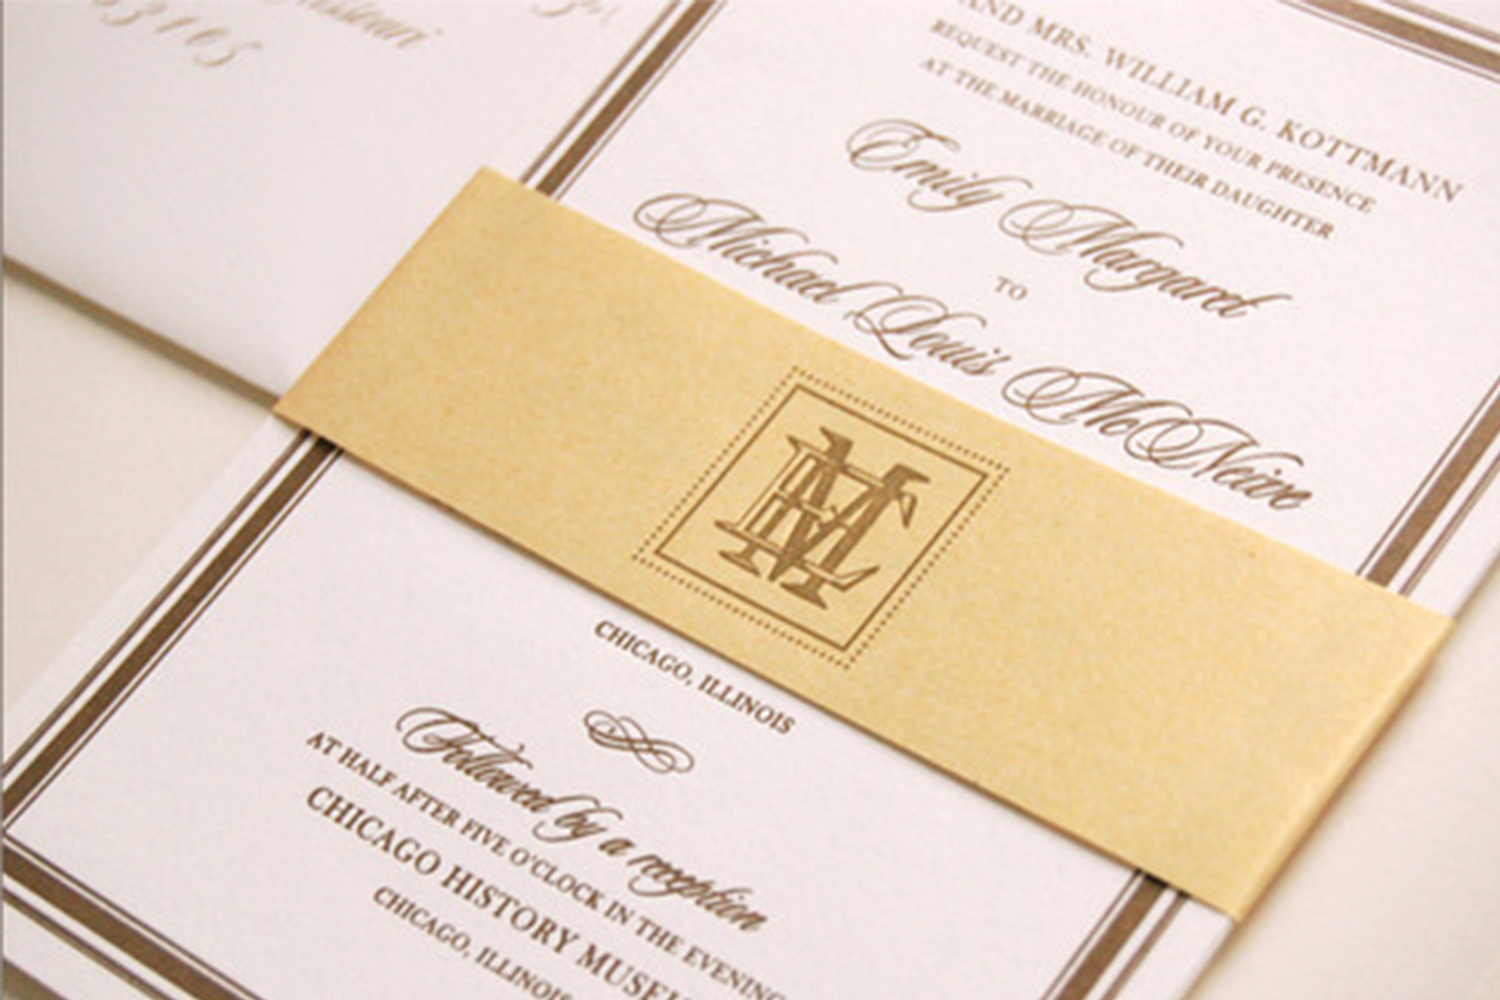 How to write Junior and Senior on your Wedding Invitation